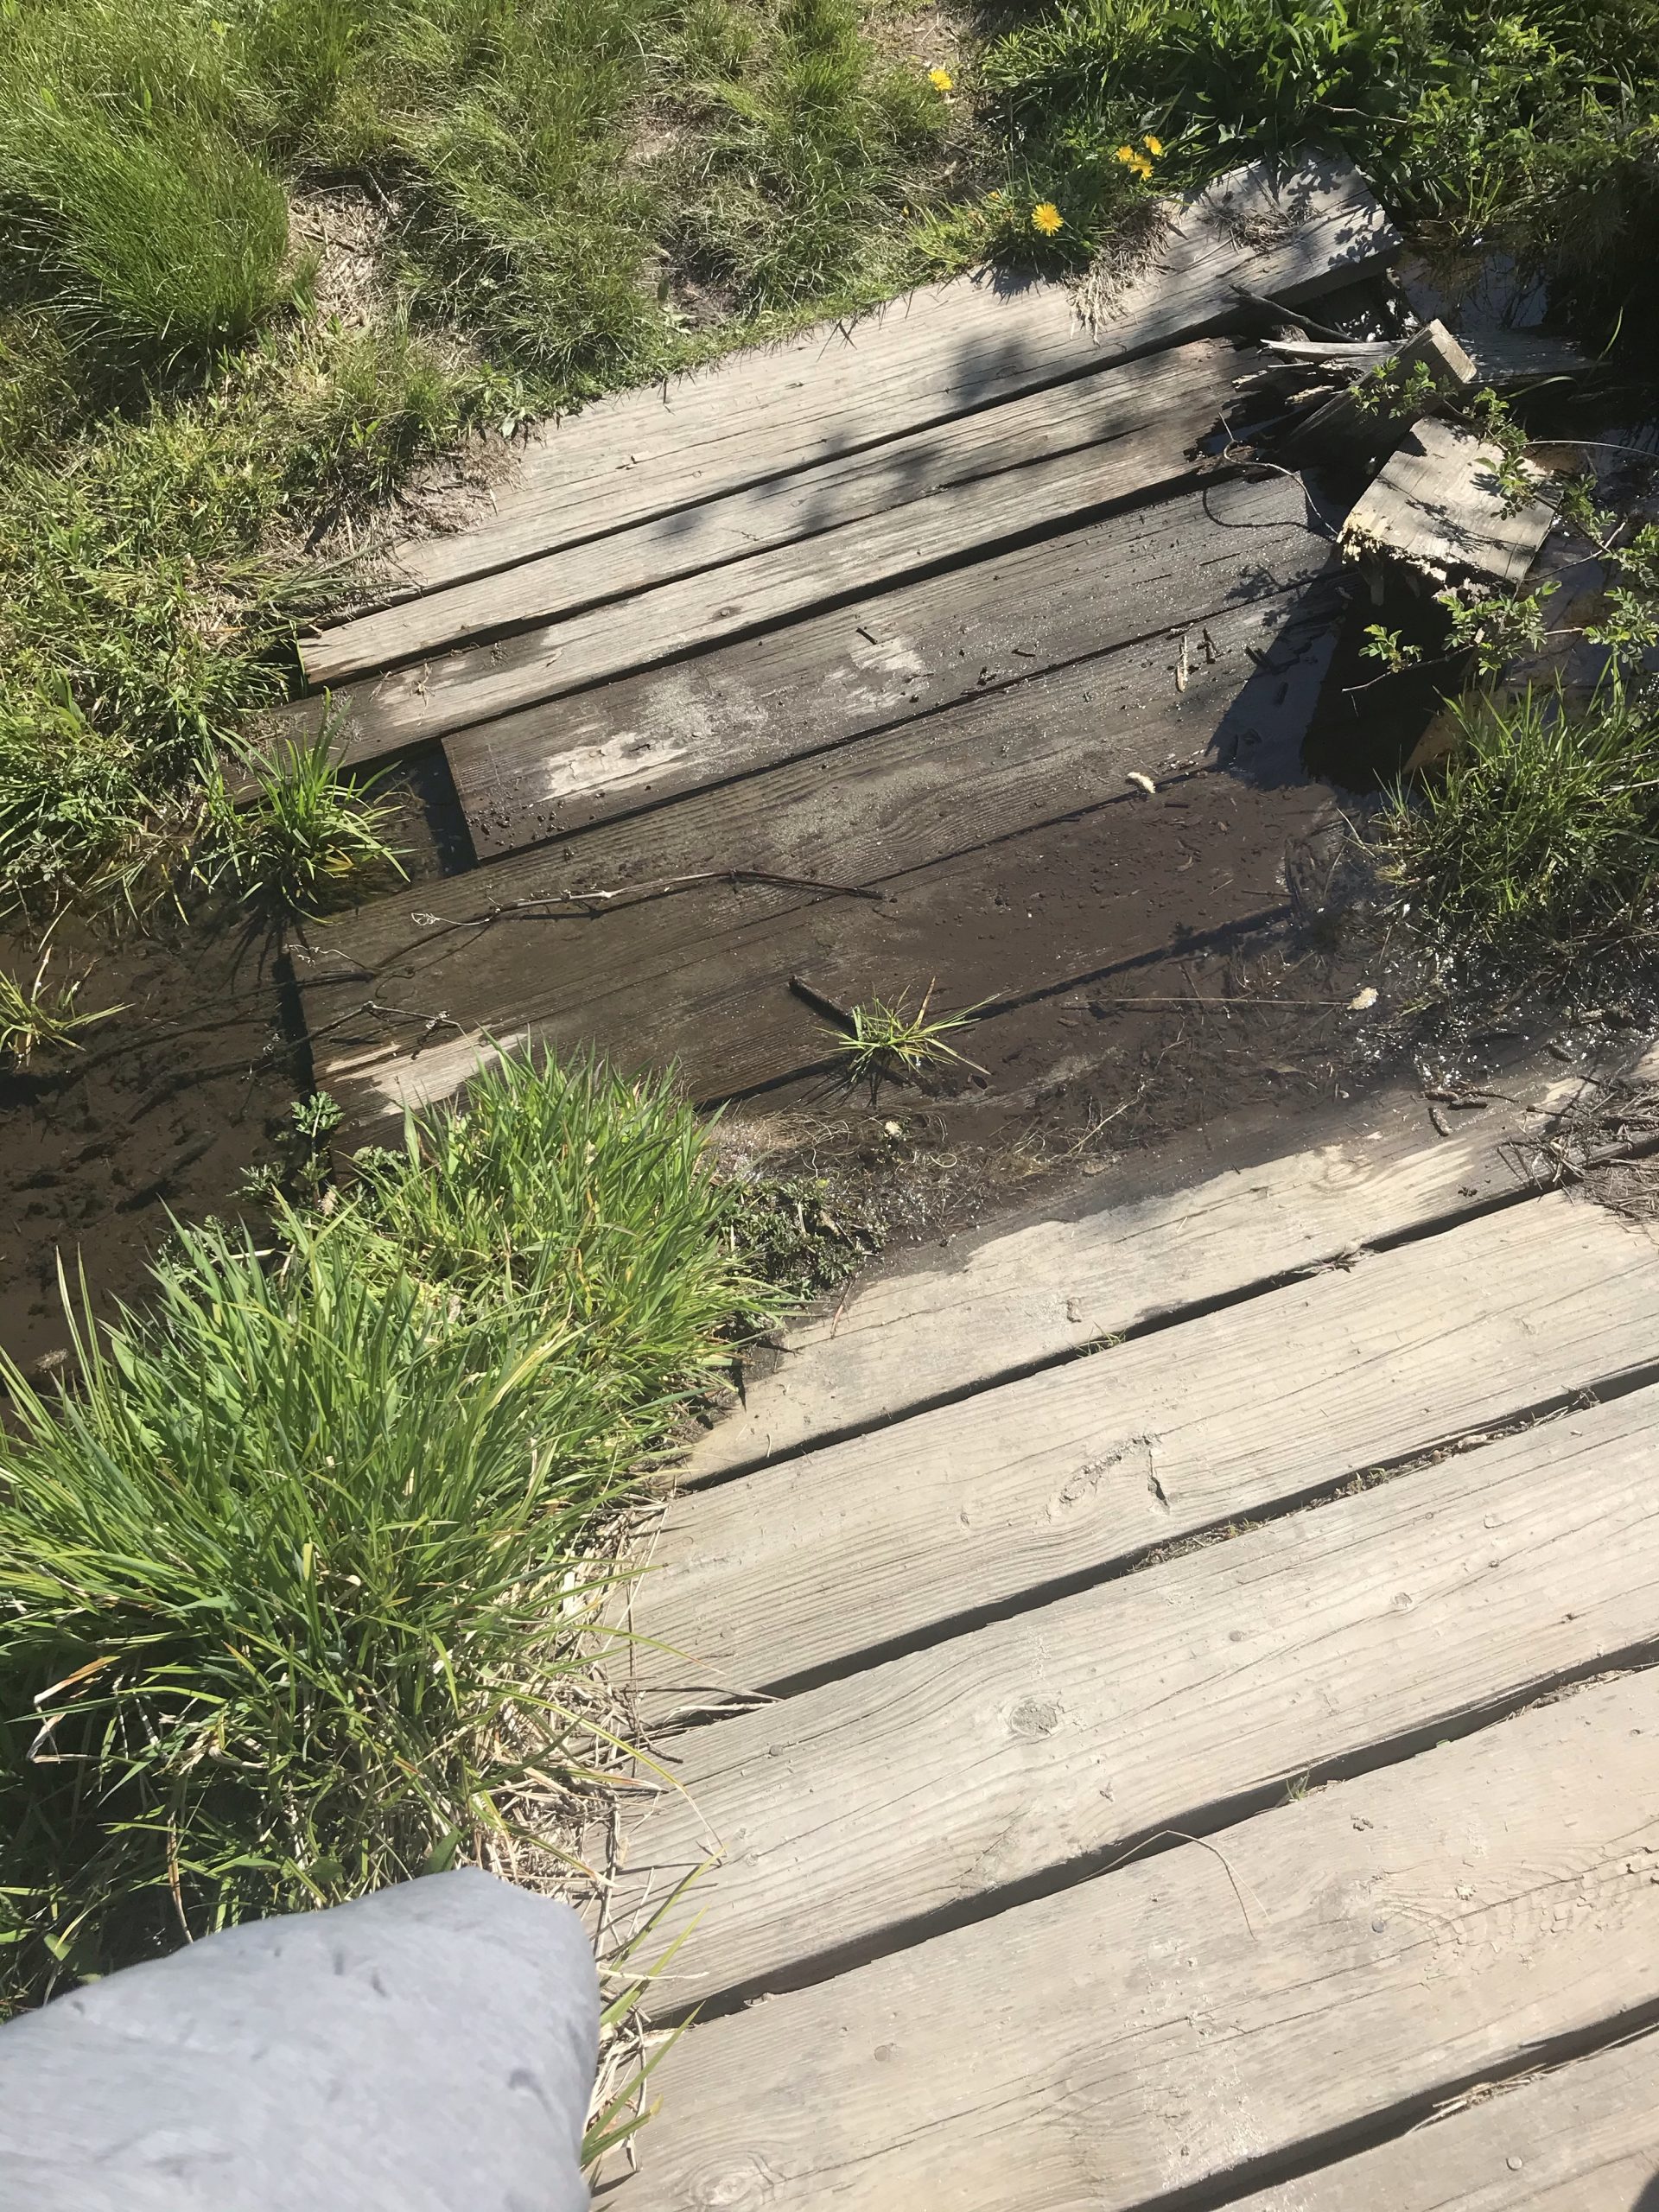 one of the small bridges on the trail in need of repair at Beavertail park